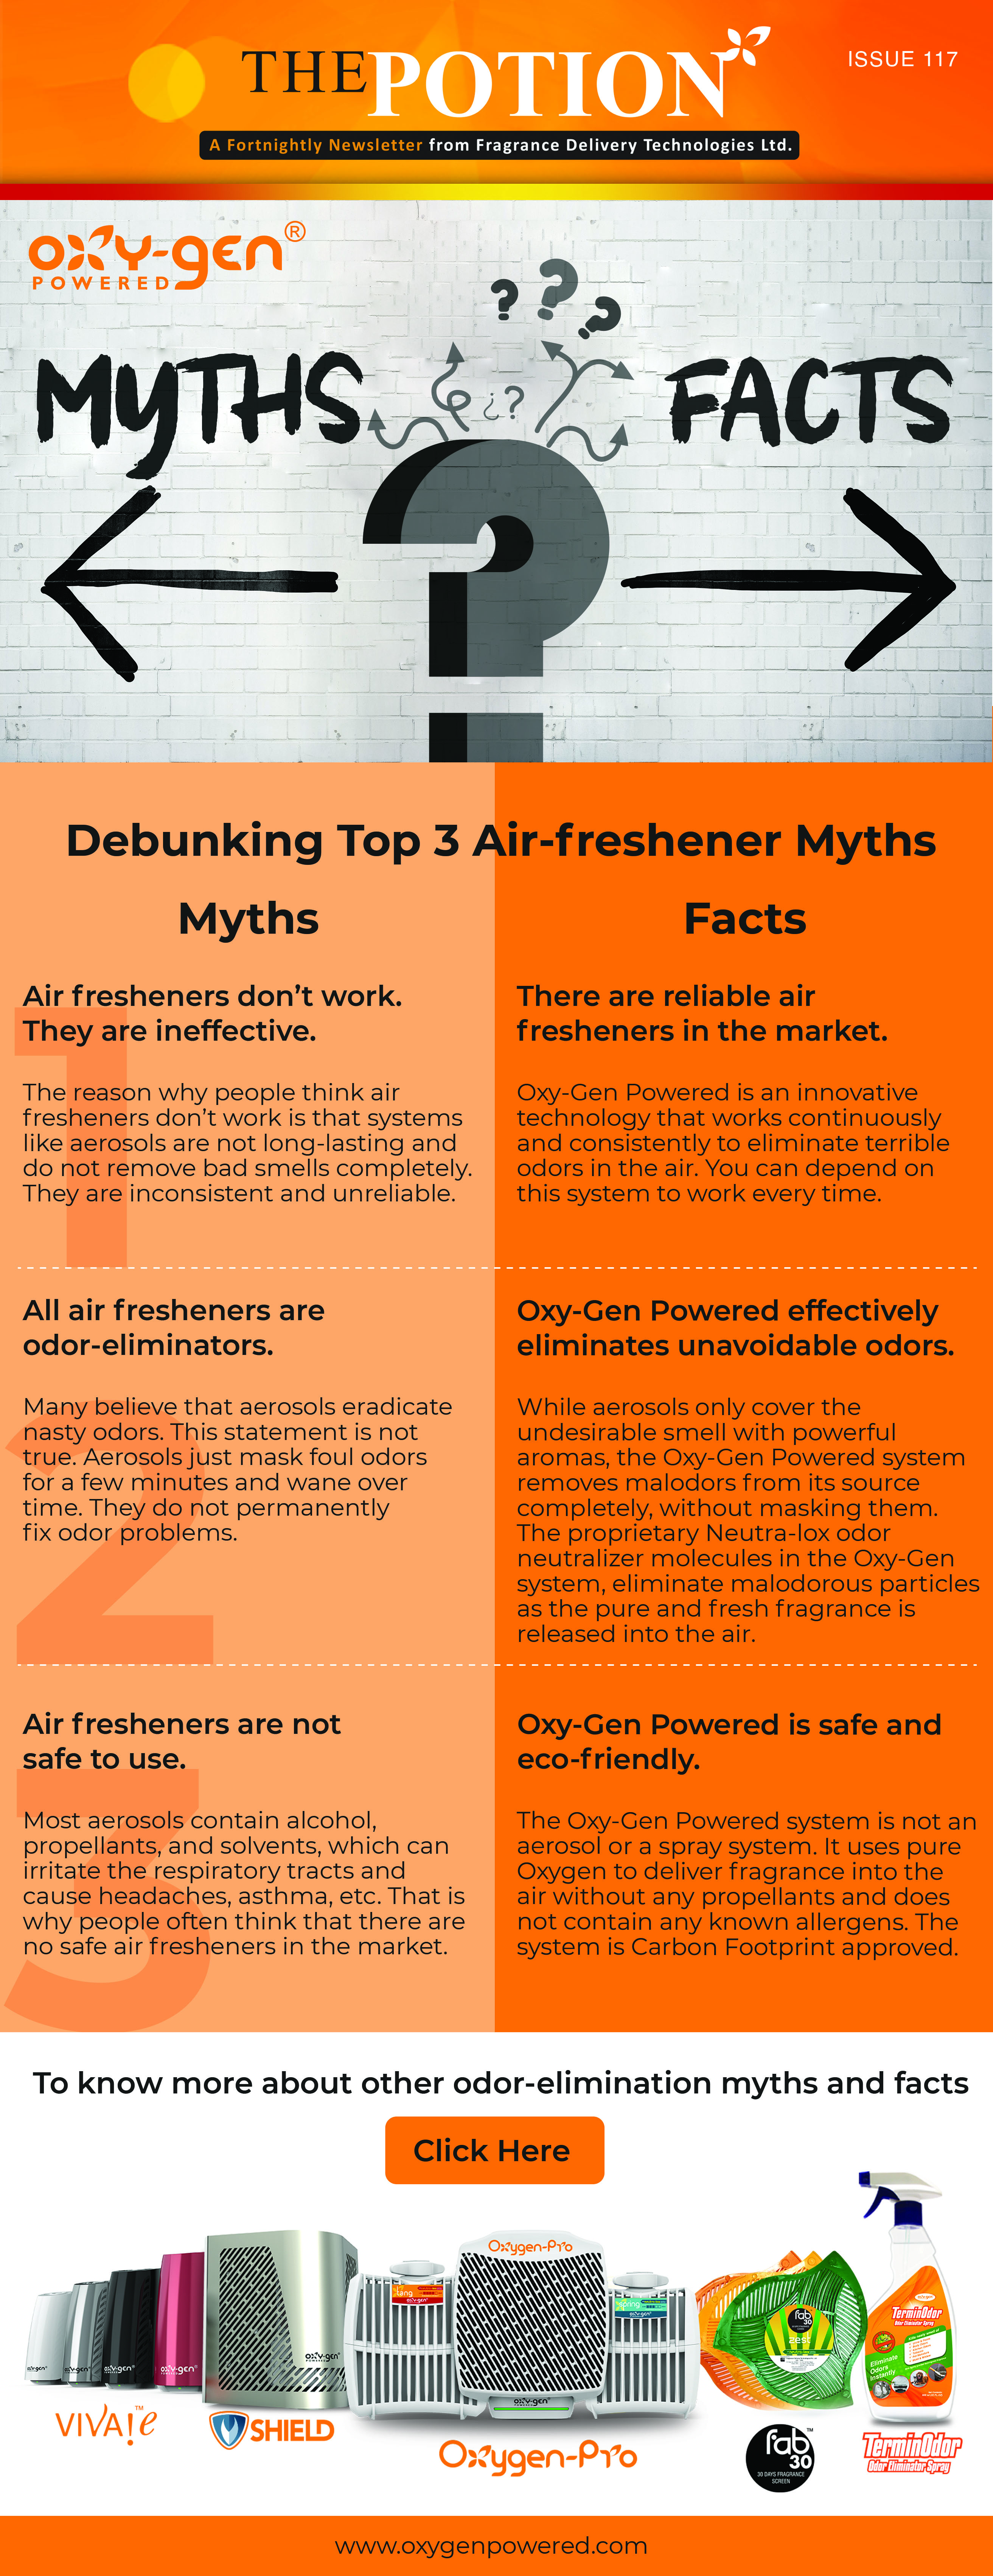 Debunking Top 3 Air-Freshener Myths - The Potion Issue 117